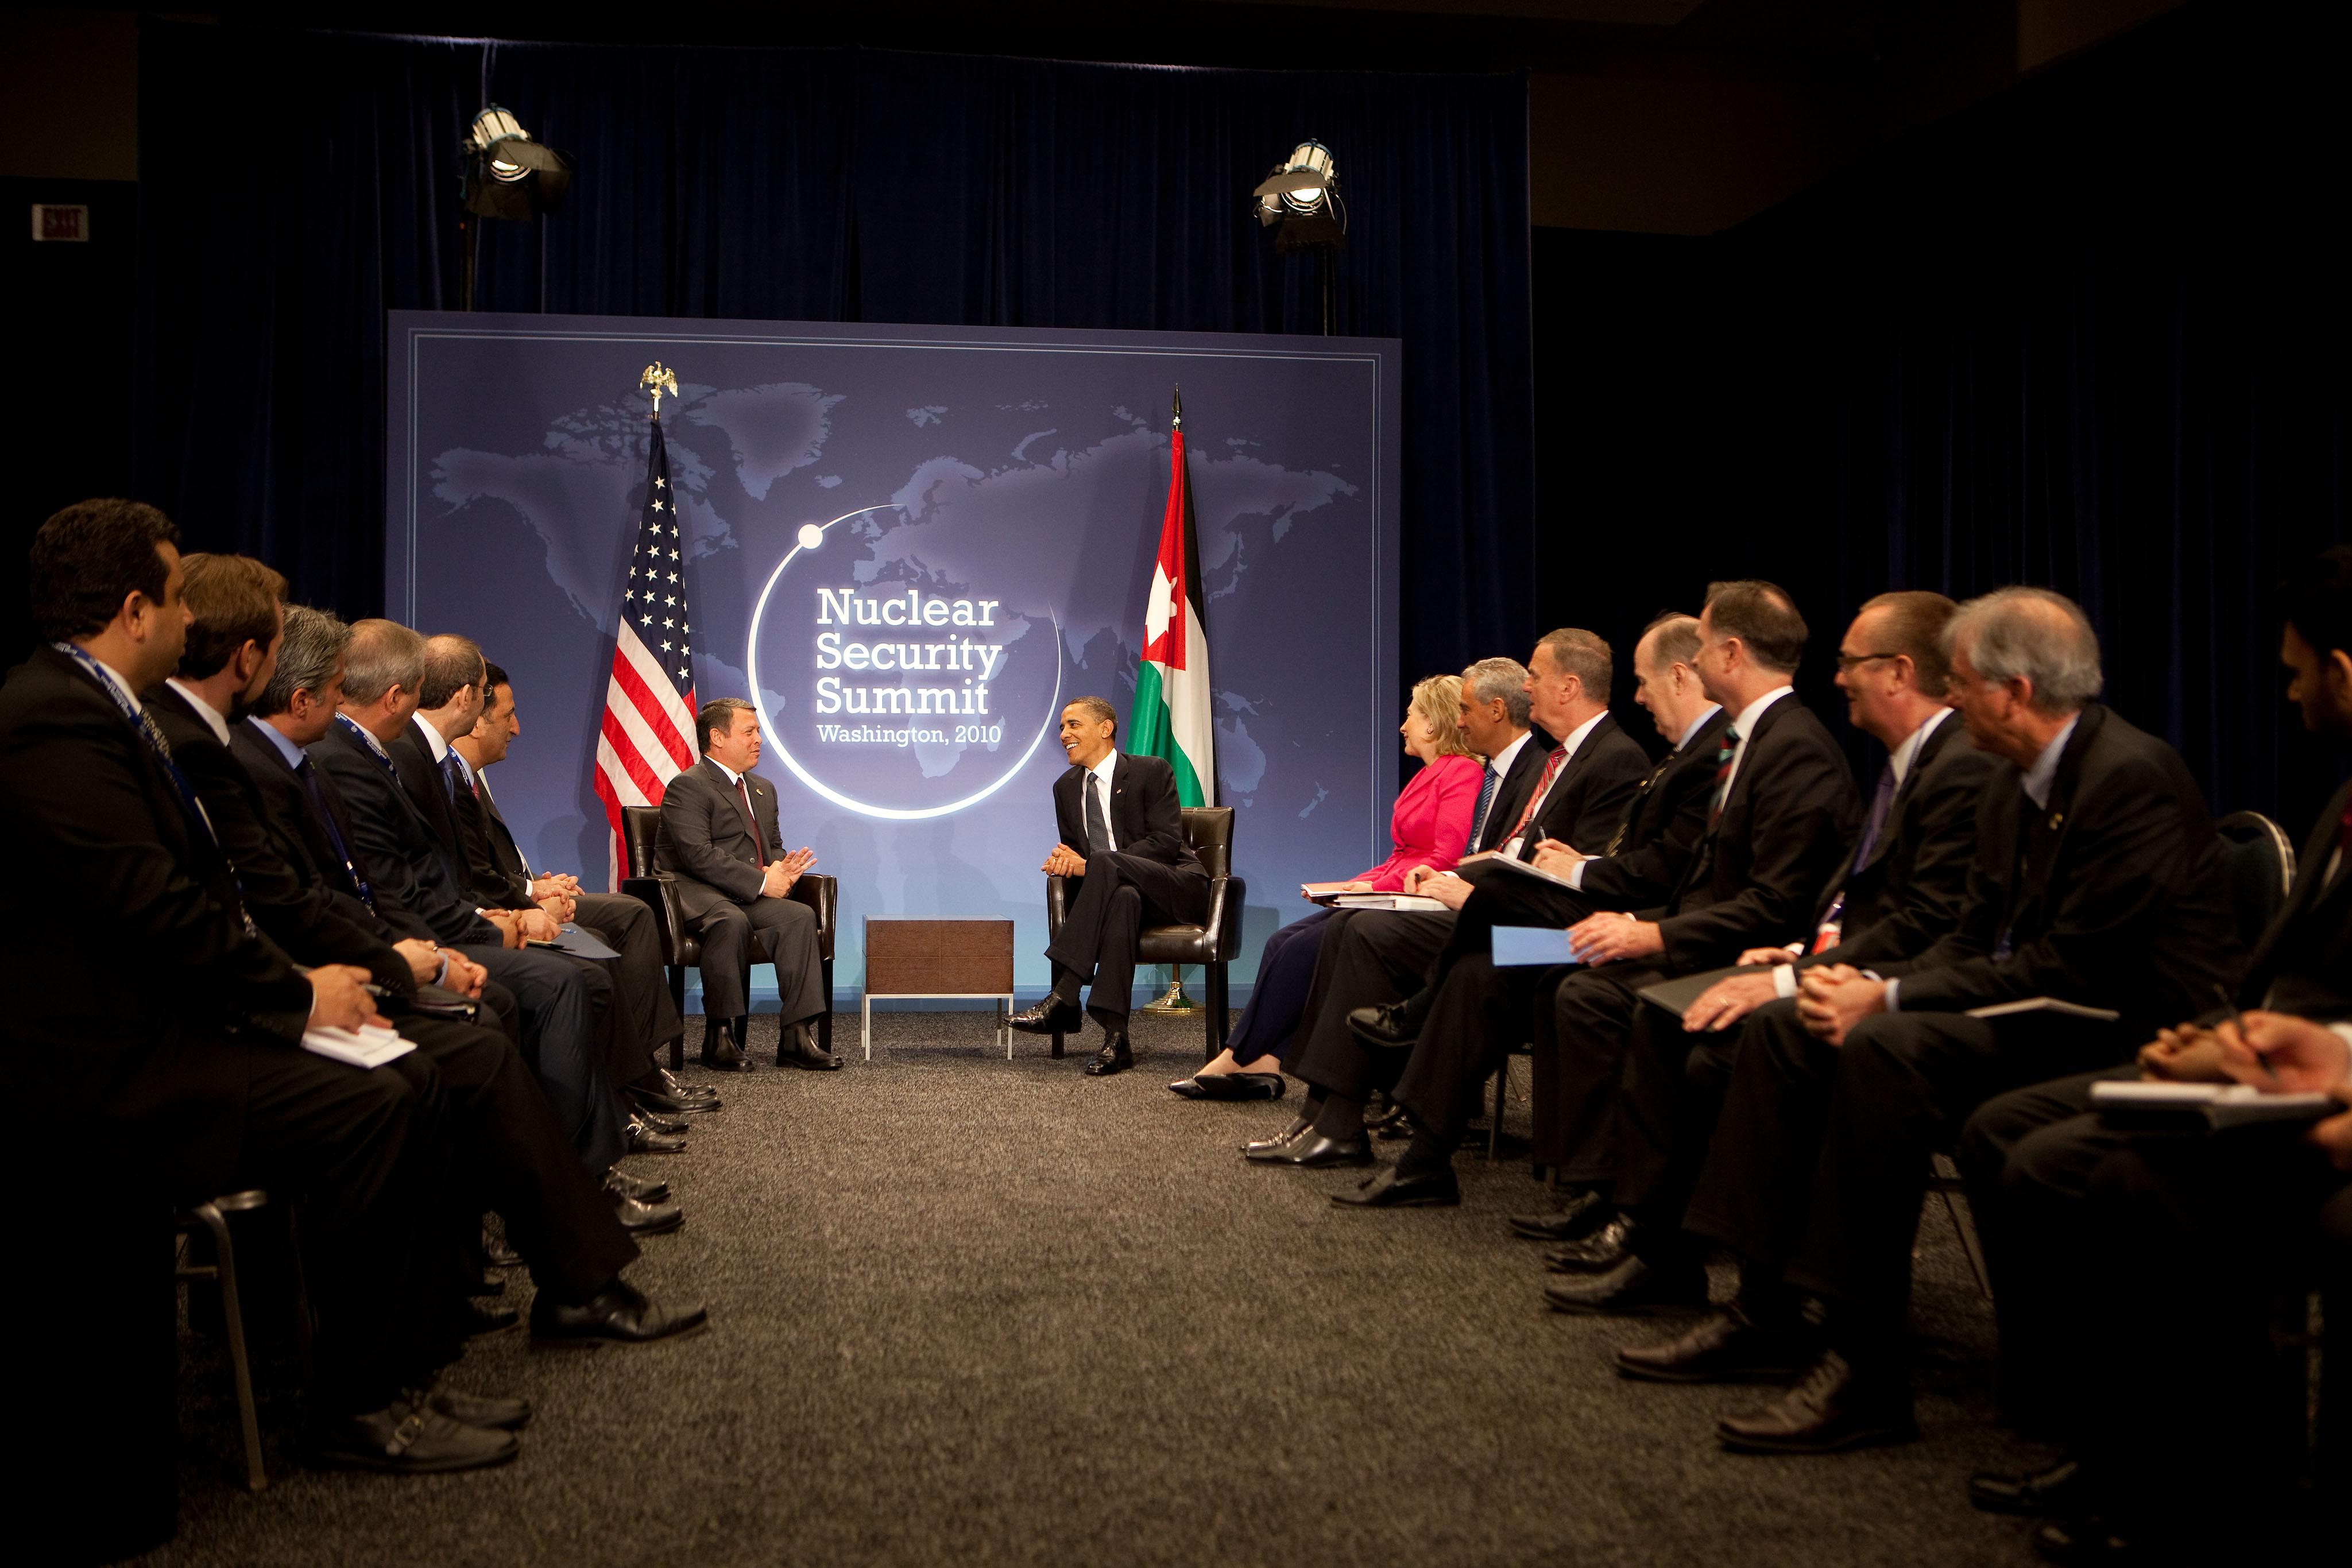 The President and King Abdullah II of Jordan at the Nuclear Security Summit 